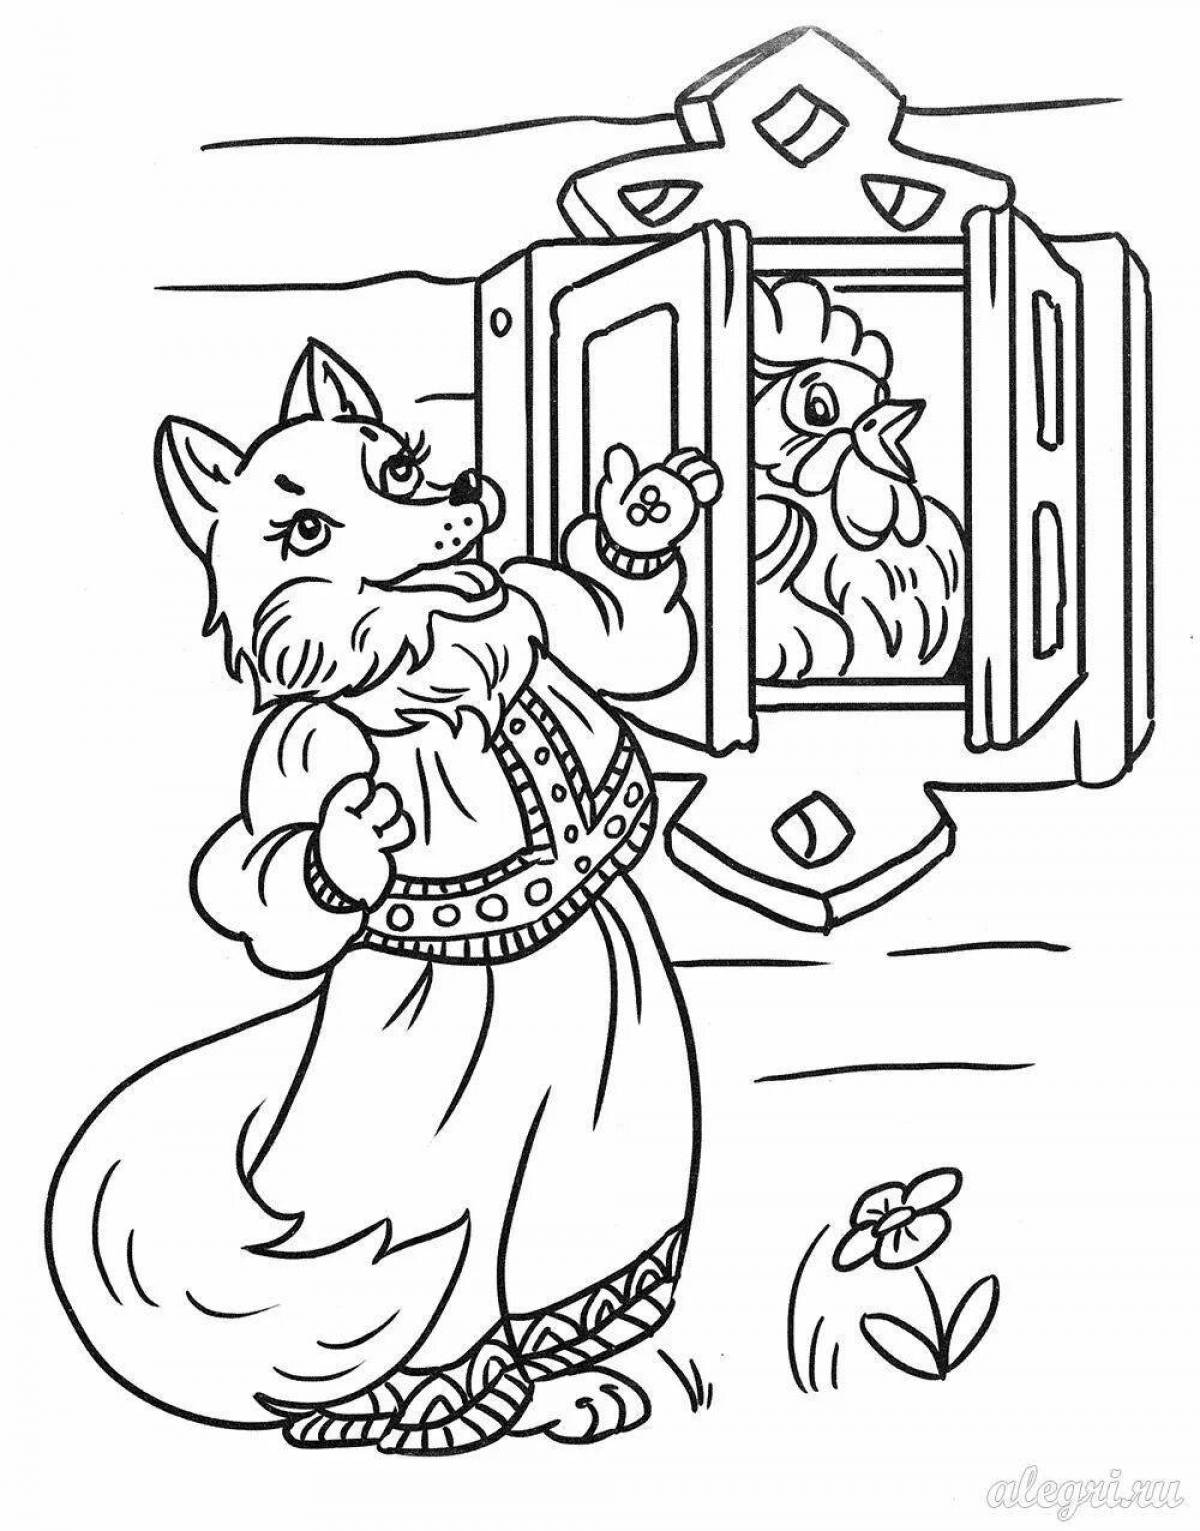 Brilliant coloring book heroes of fairy tales